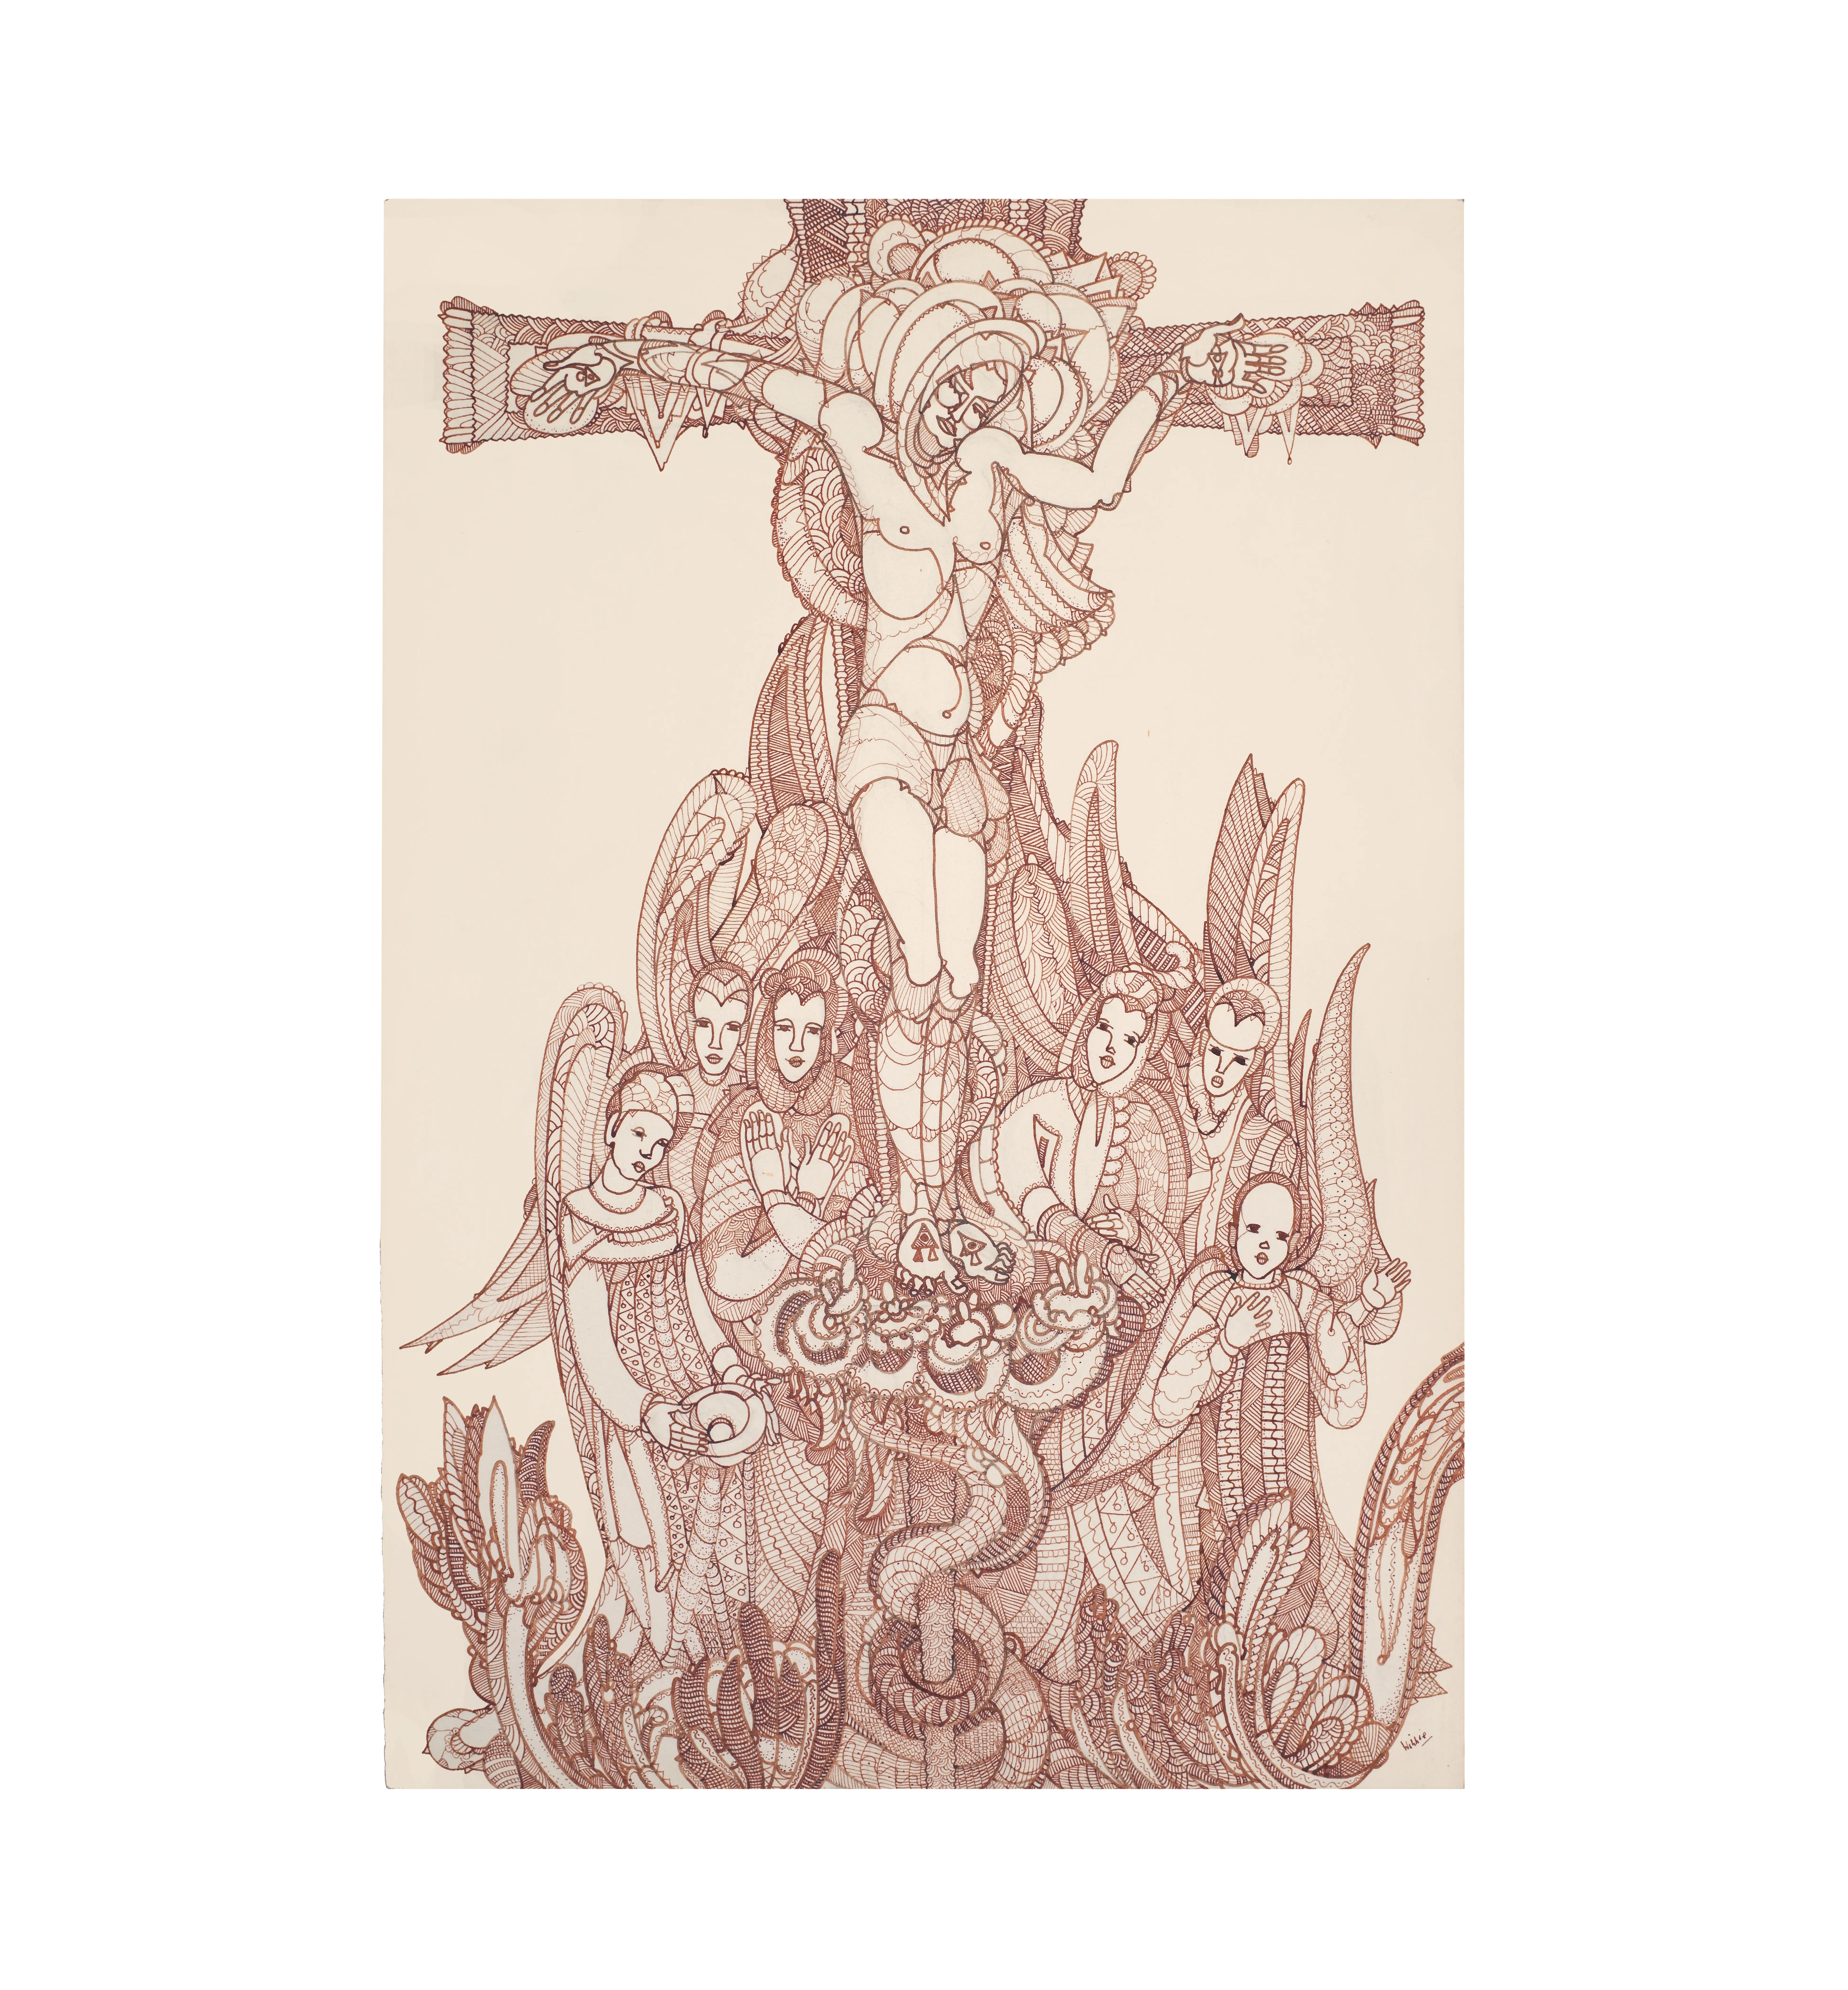 Vintage 1960s Christ and Followers Fantasy Line Art Illustration Drawing